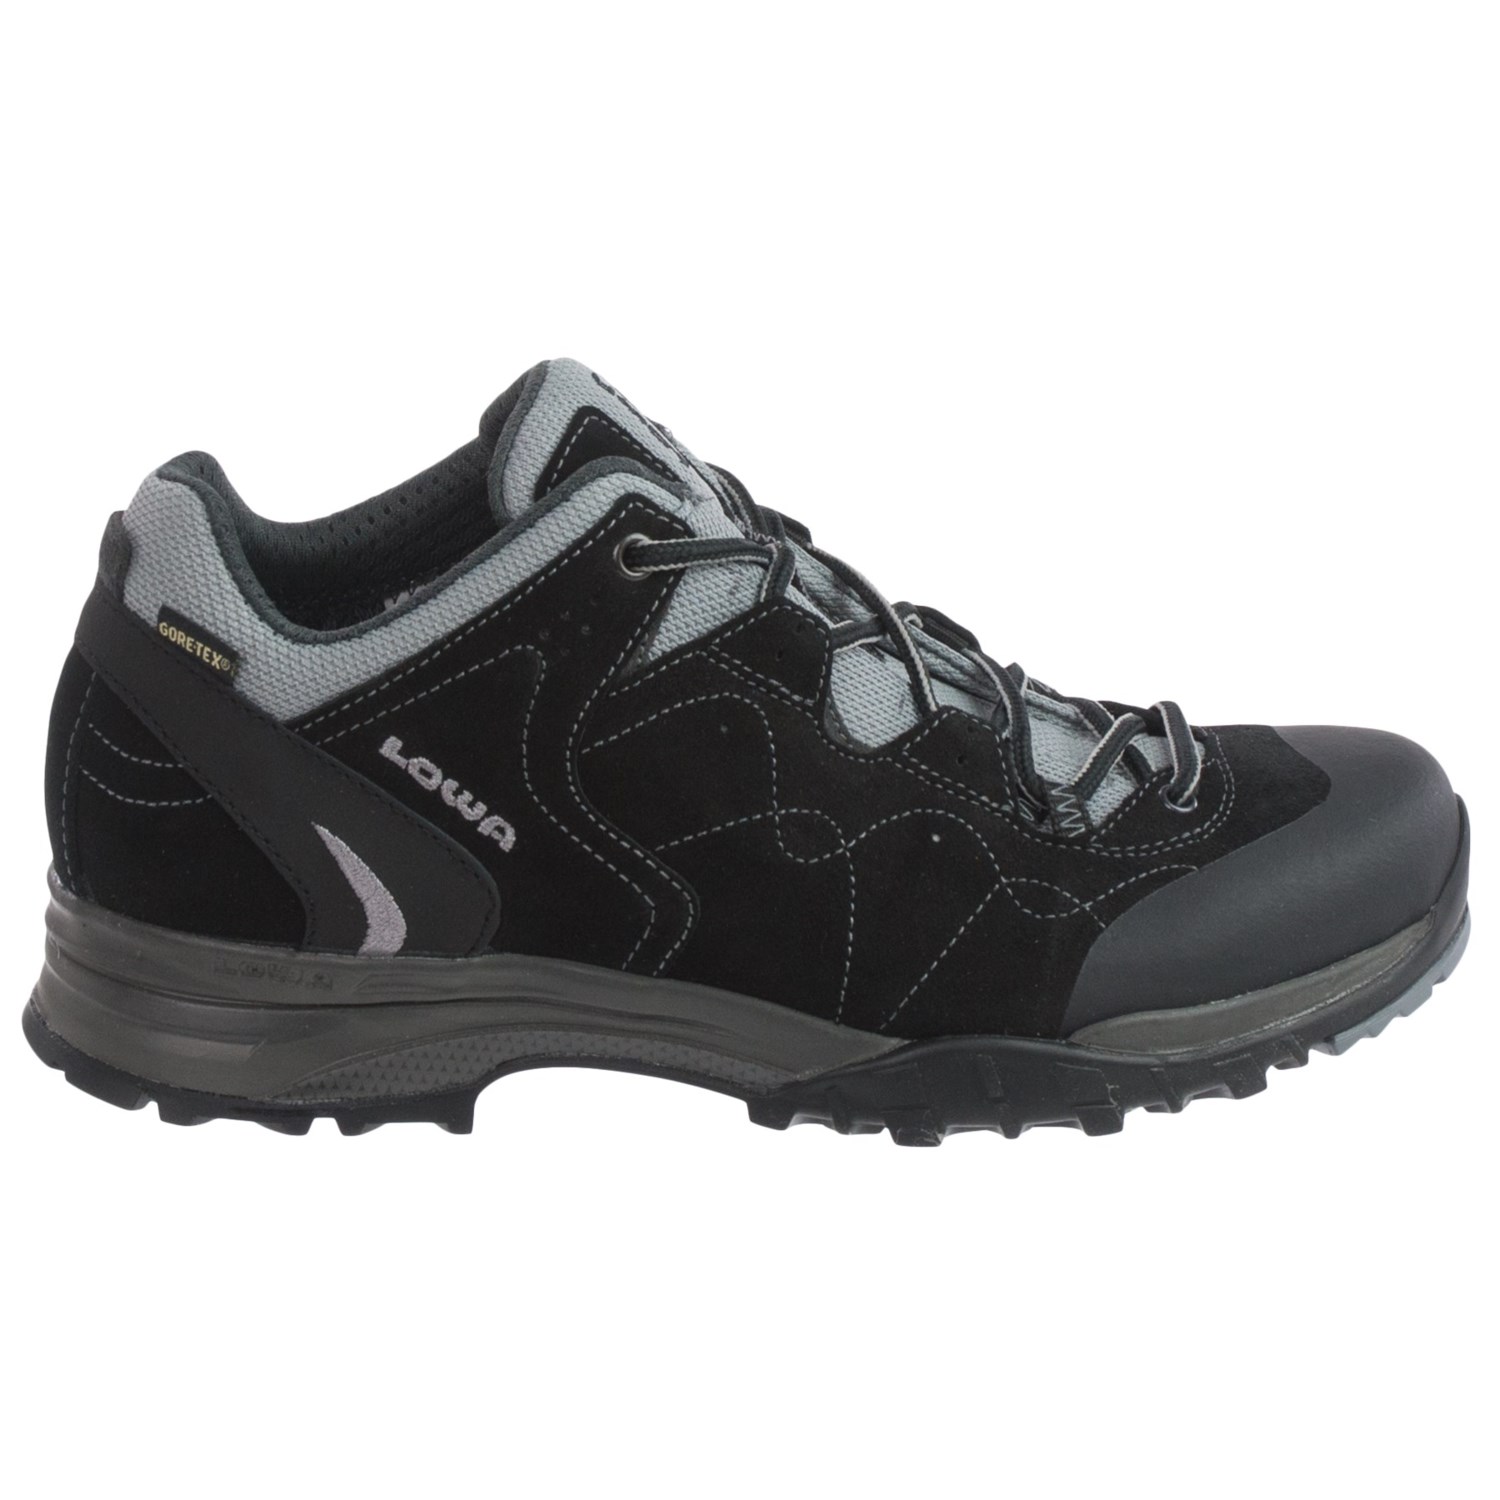 Lowa Focus Gore-Tex® Lo Hiking Shoes (For Women) 9821Y - Save 57%